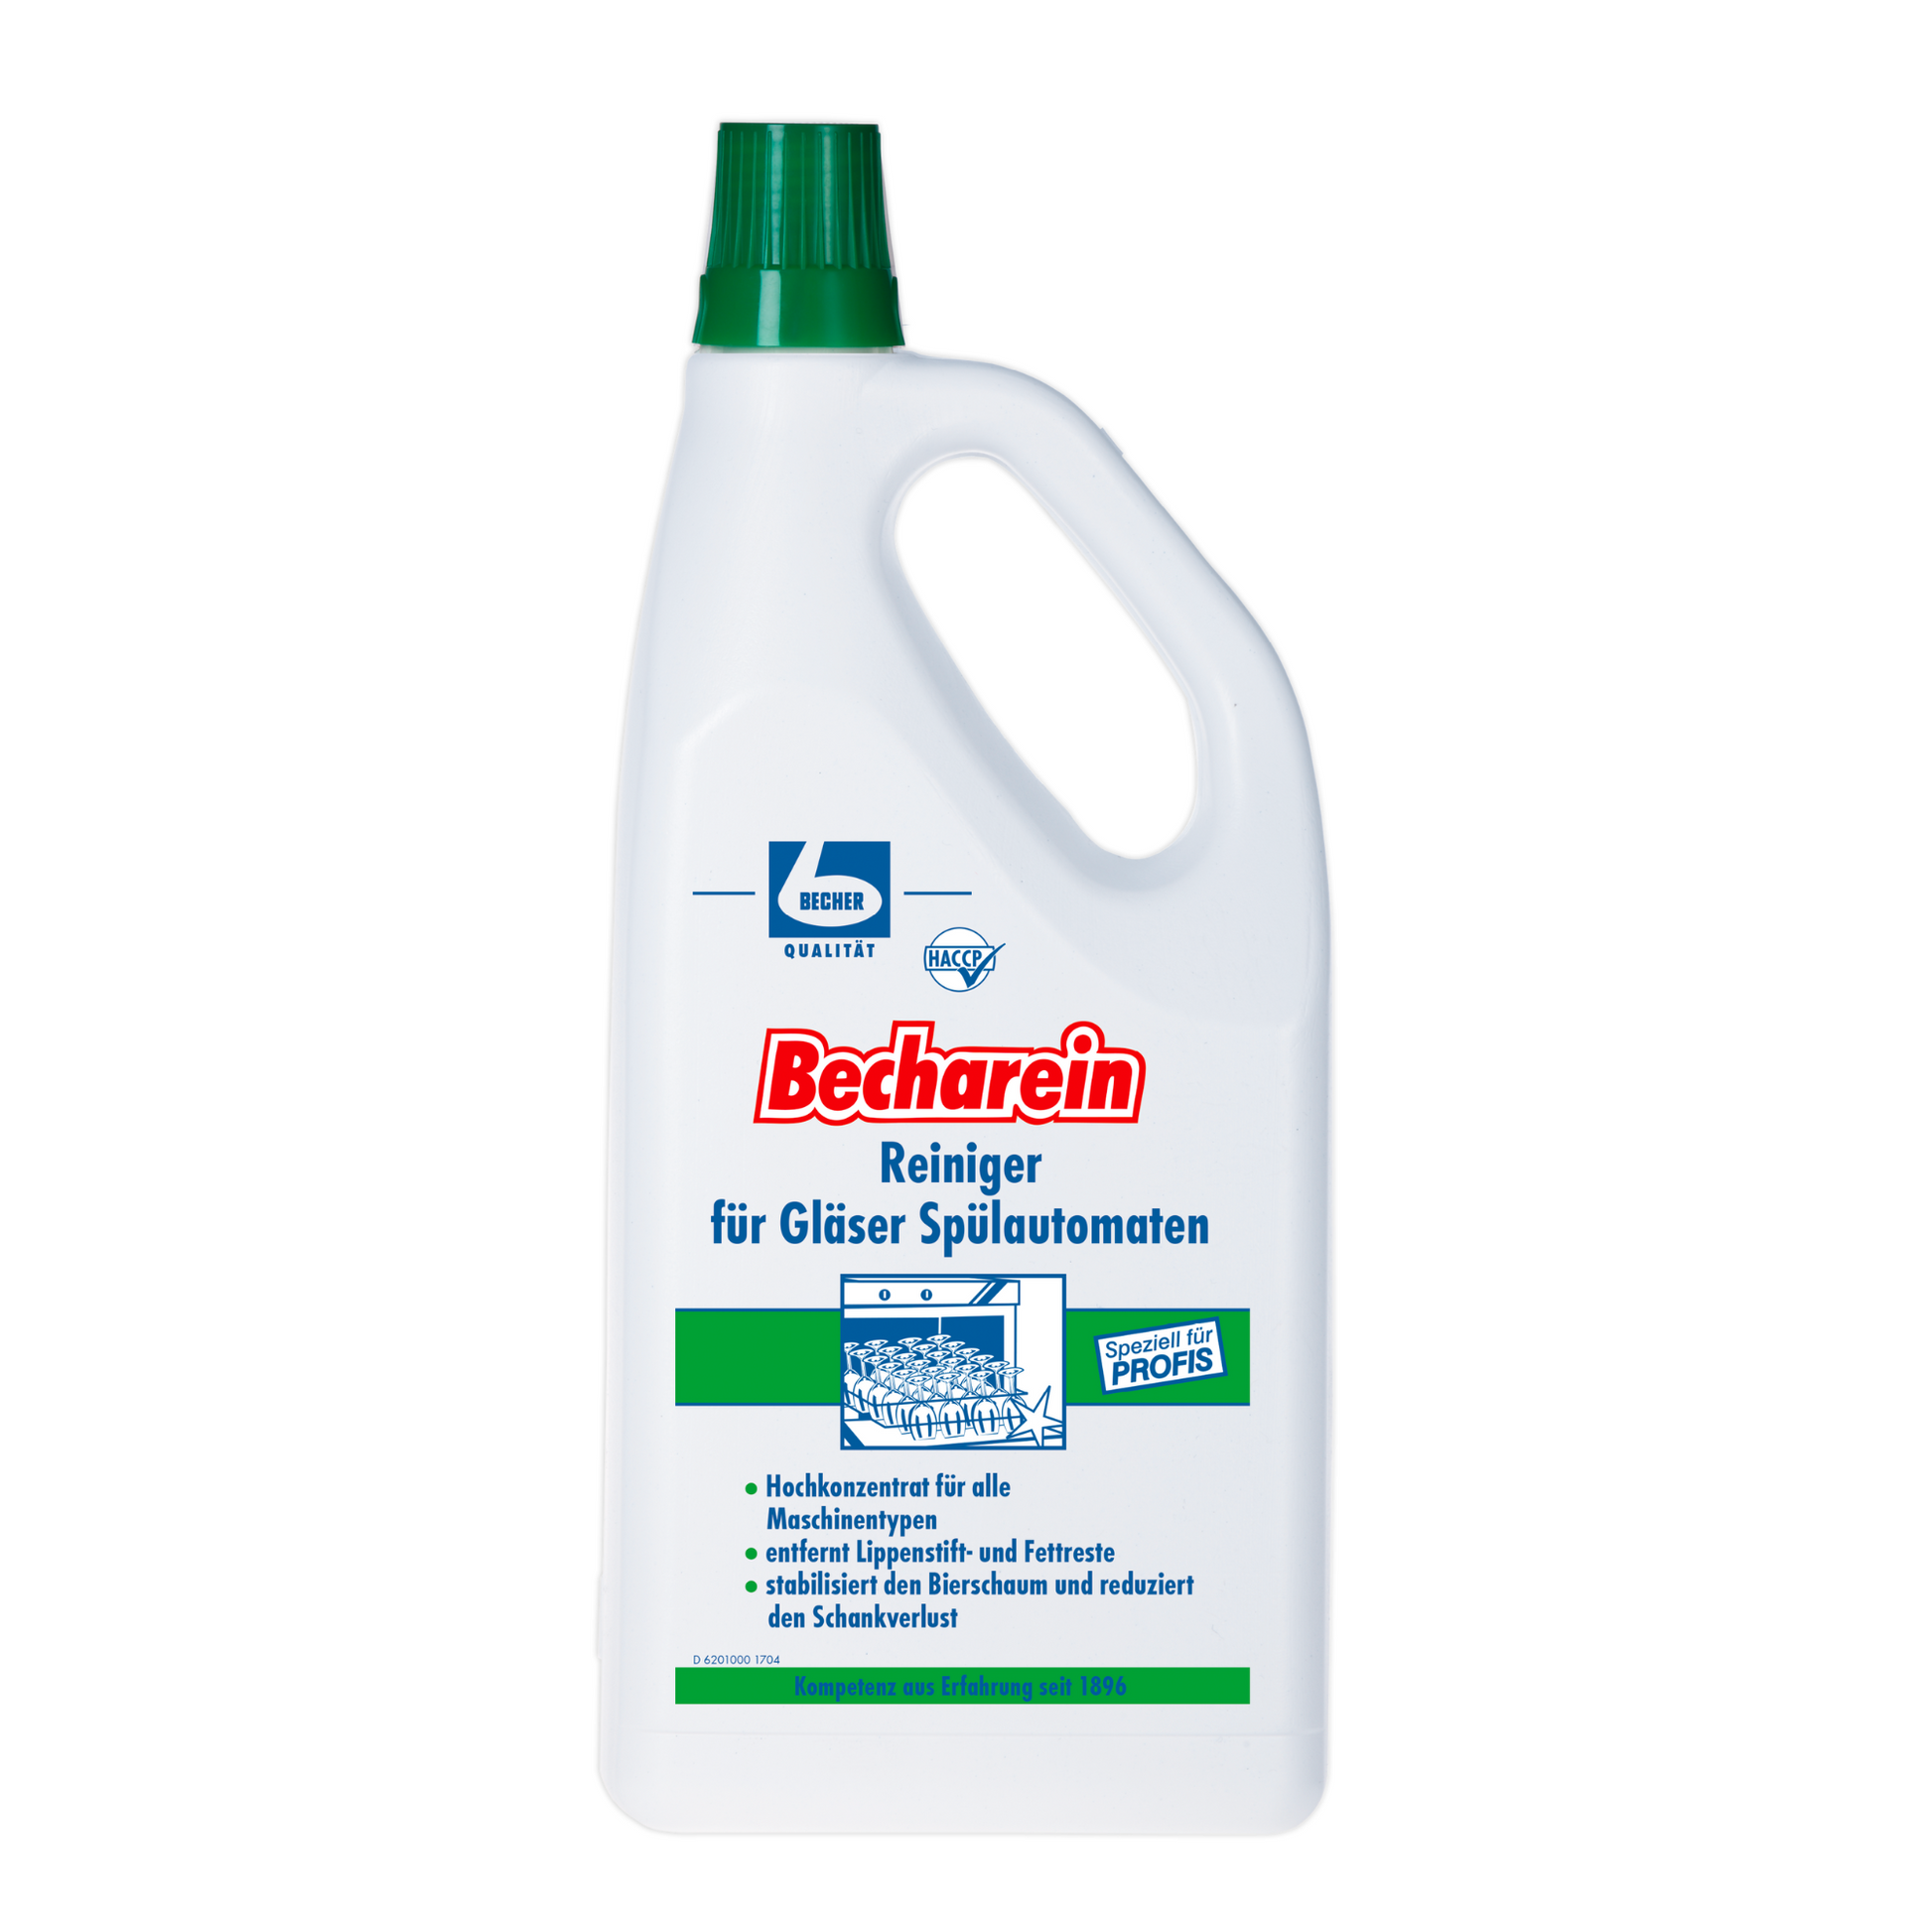 Dr. Cup of Bucharin cleaner for glass flushing machines - 2 liters